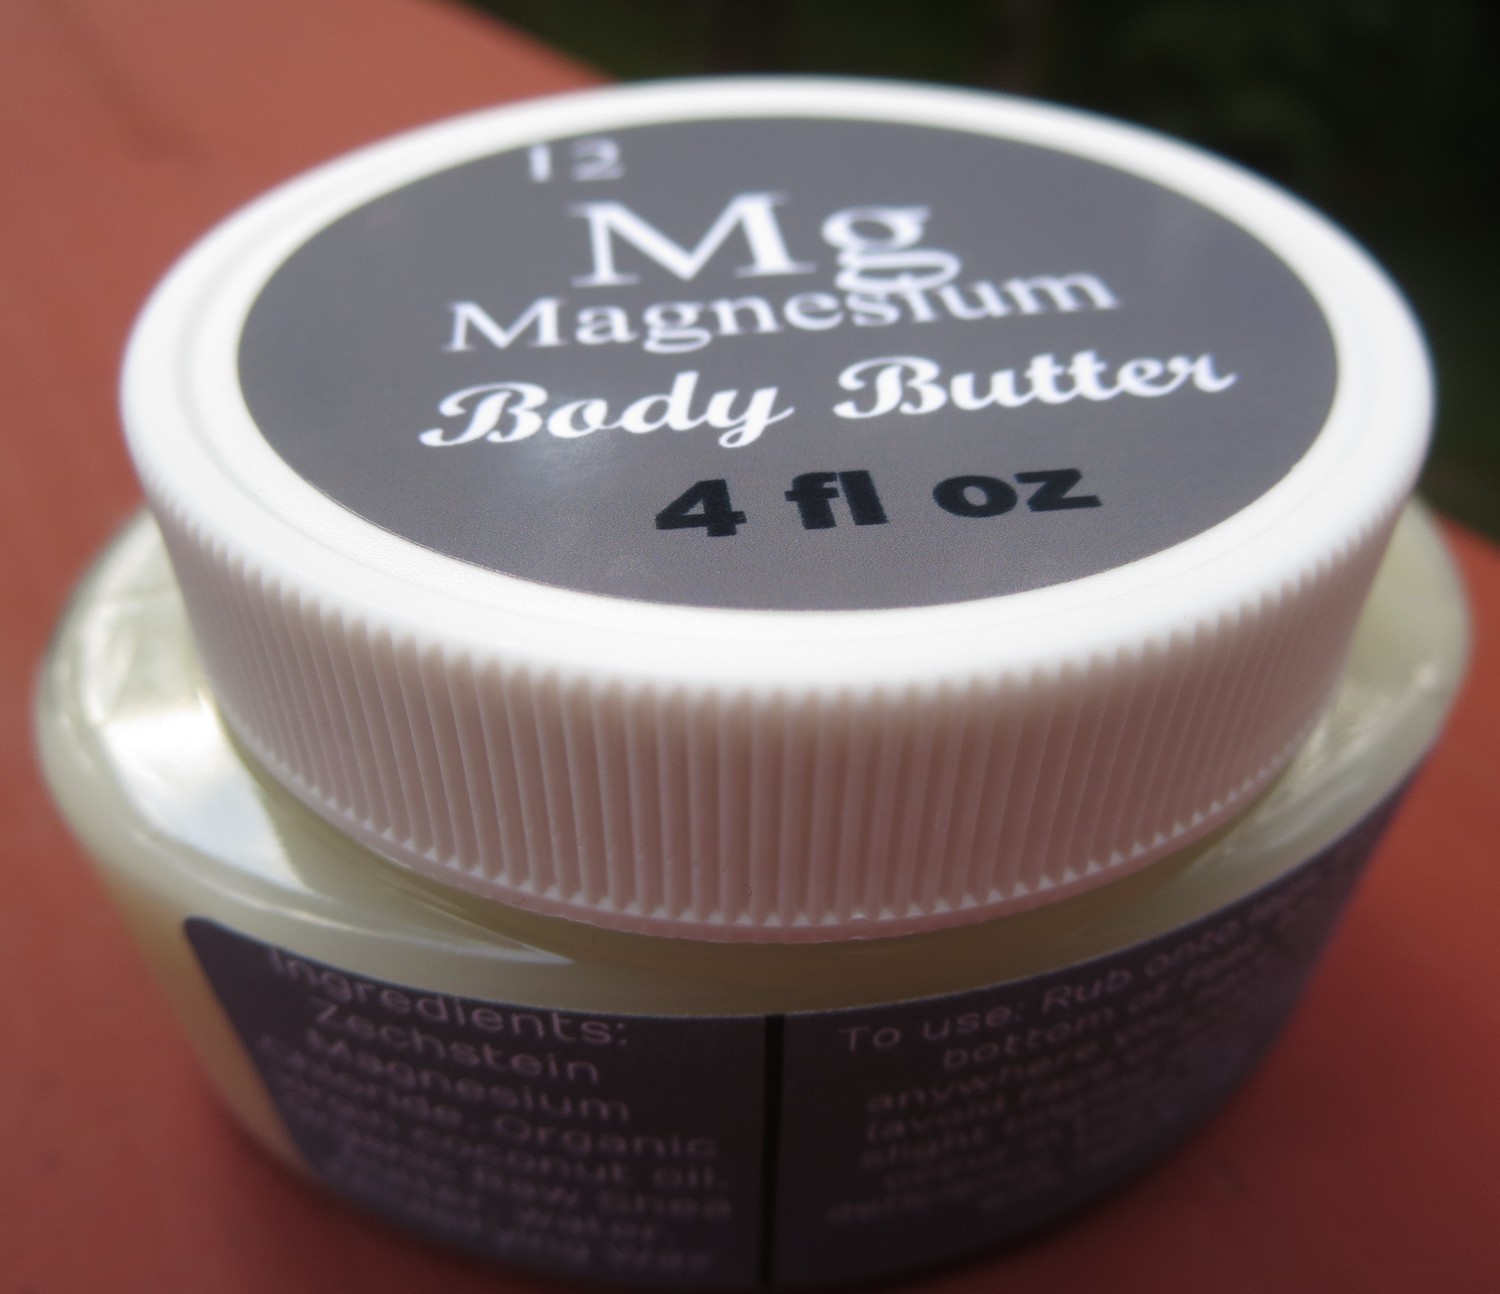 Magnesium Body Butter unscented or with Lavender